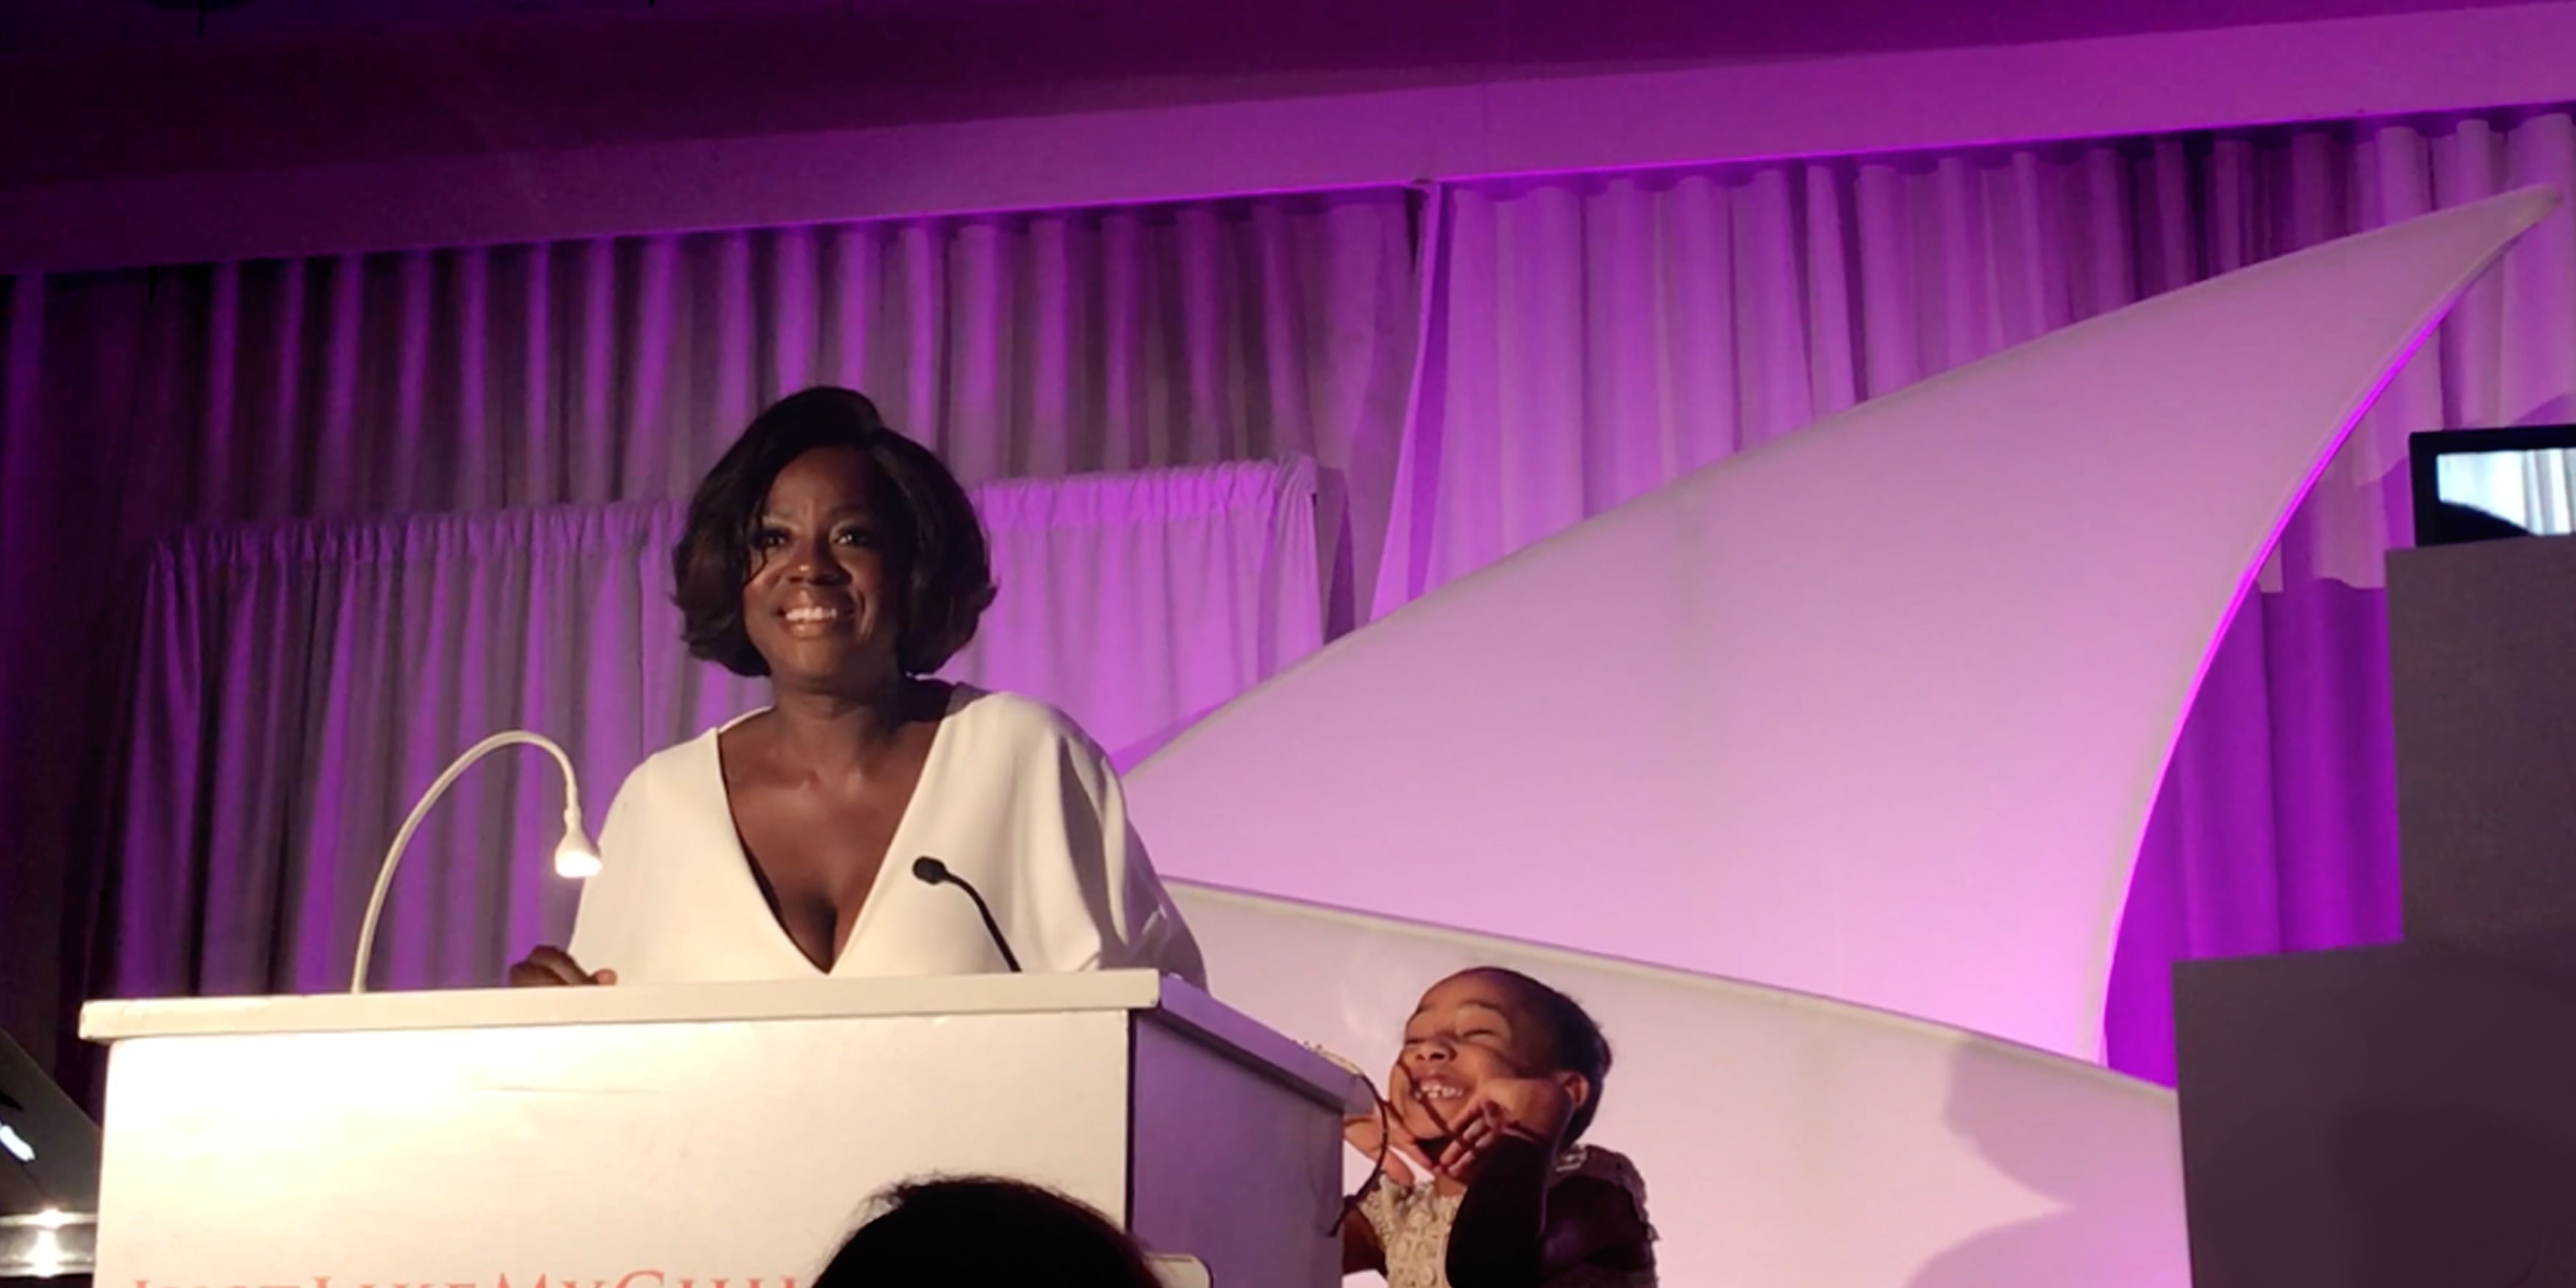 Academy Award Winner, Viola Davis, Speaks Out On Overcoming Struggles And How She’s Giving Back